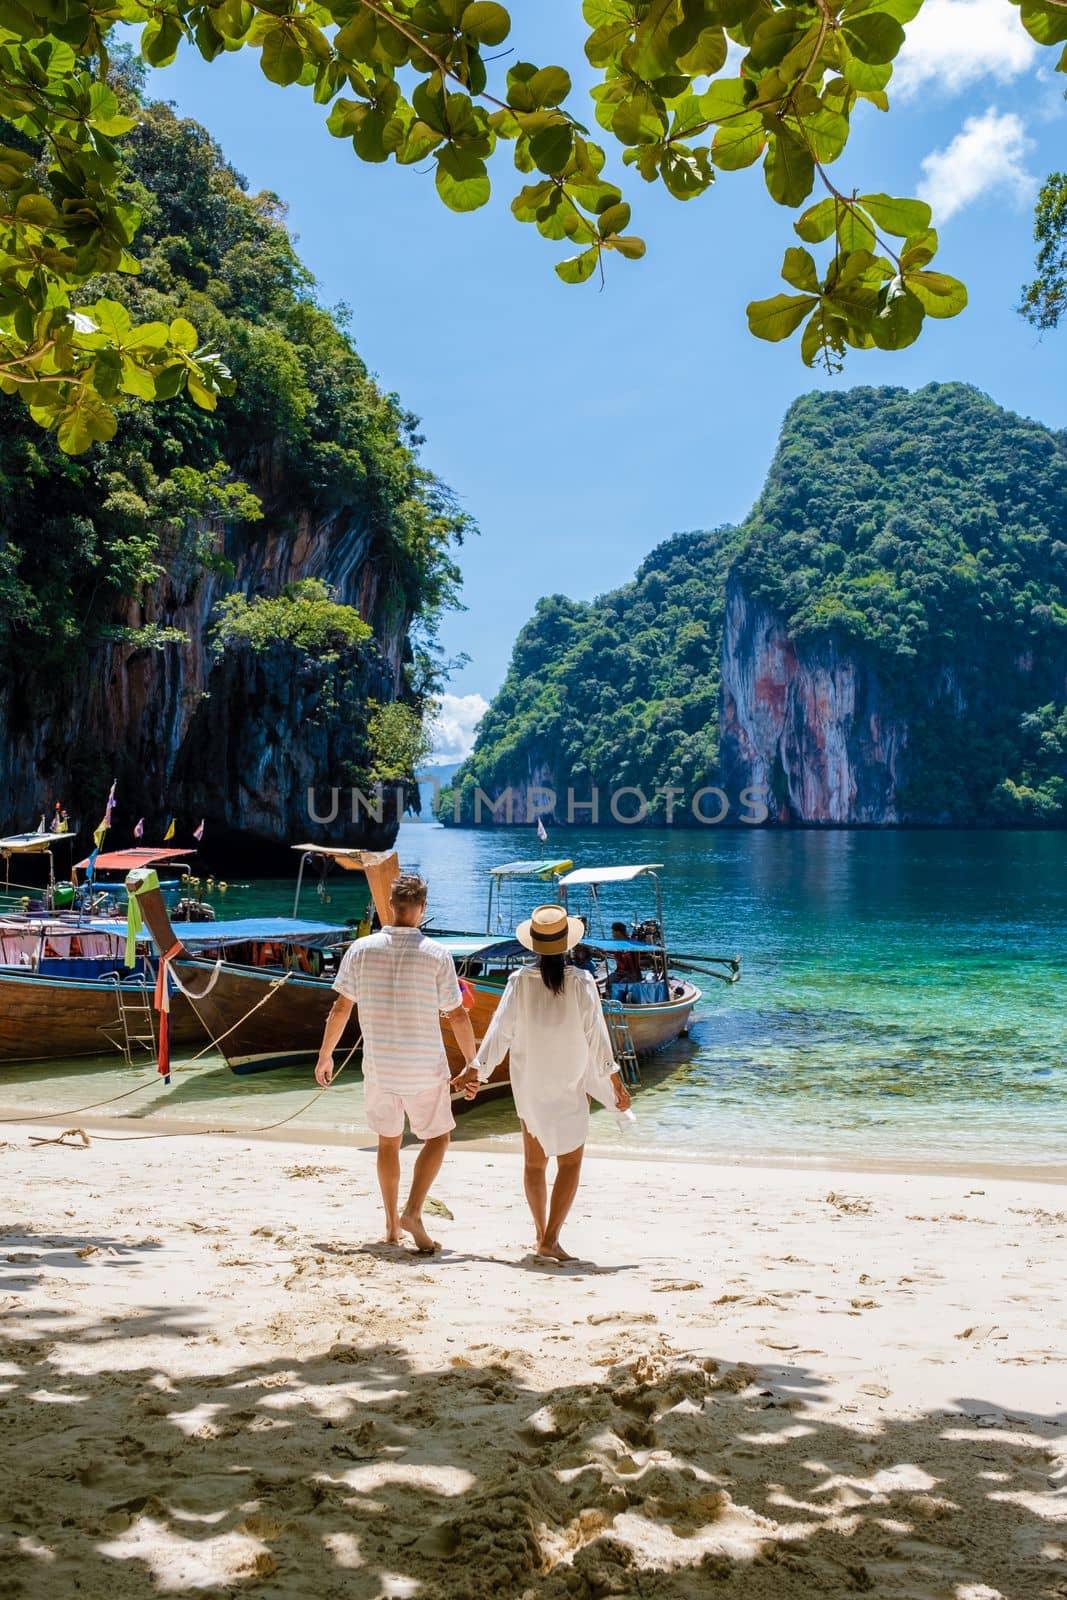 Men and women at the Tropical lagoon of Koh Loa Lading Krabi Thailand part of Koh Hong Islands by fokkebok